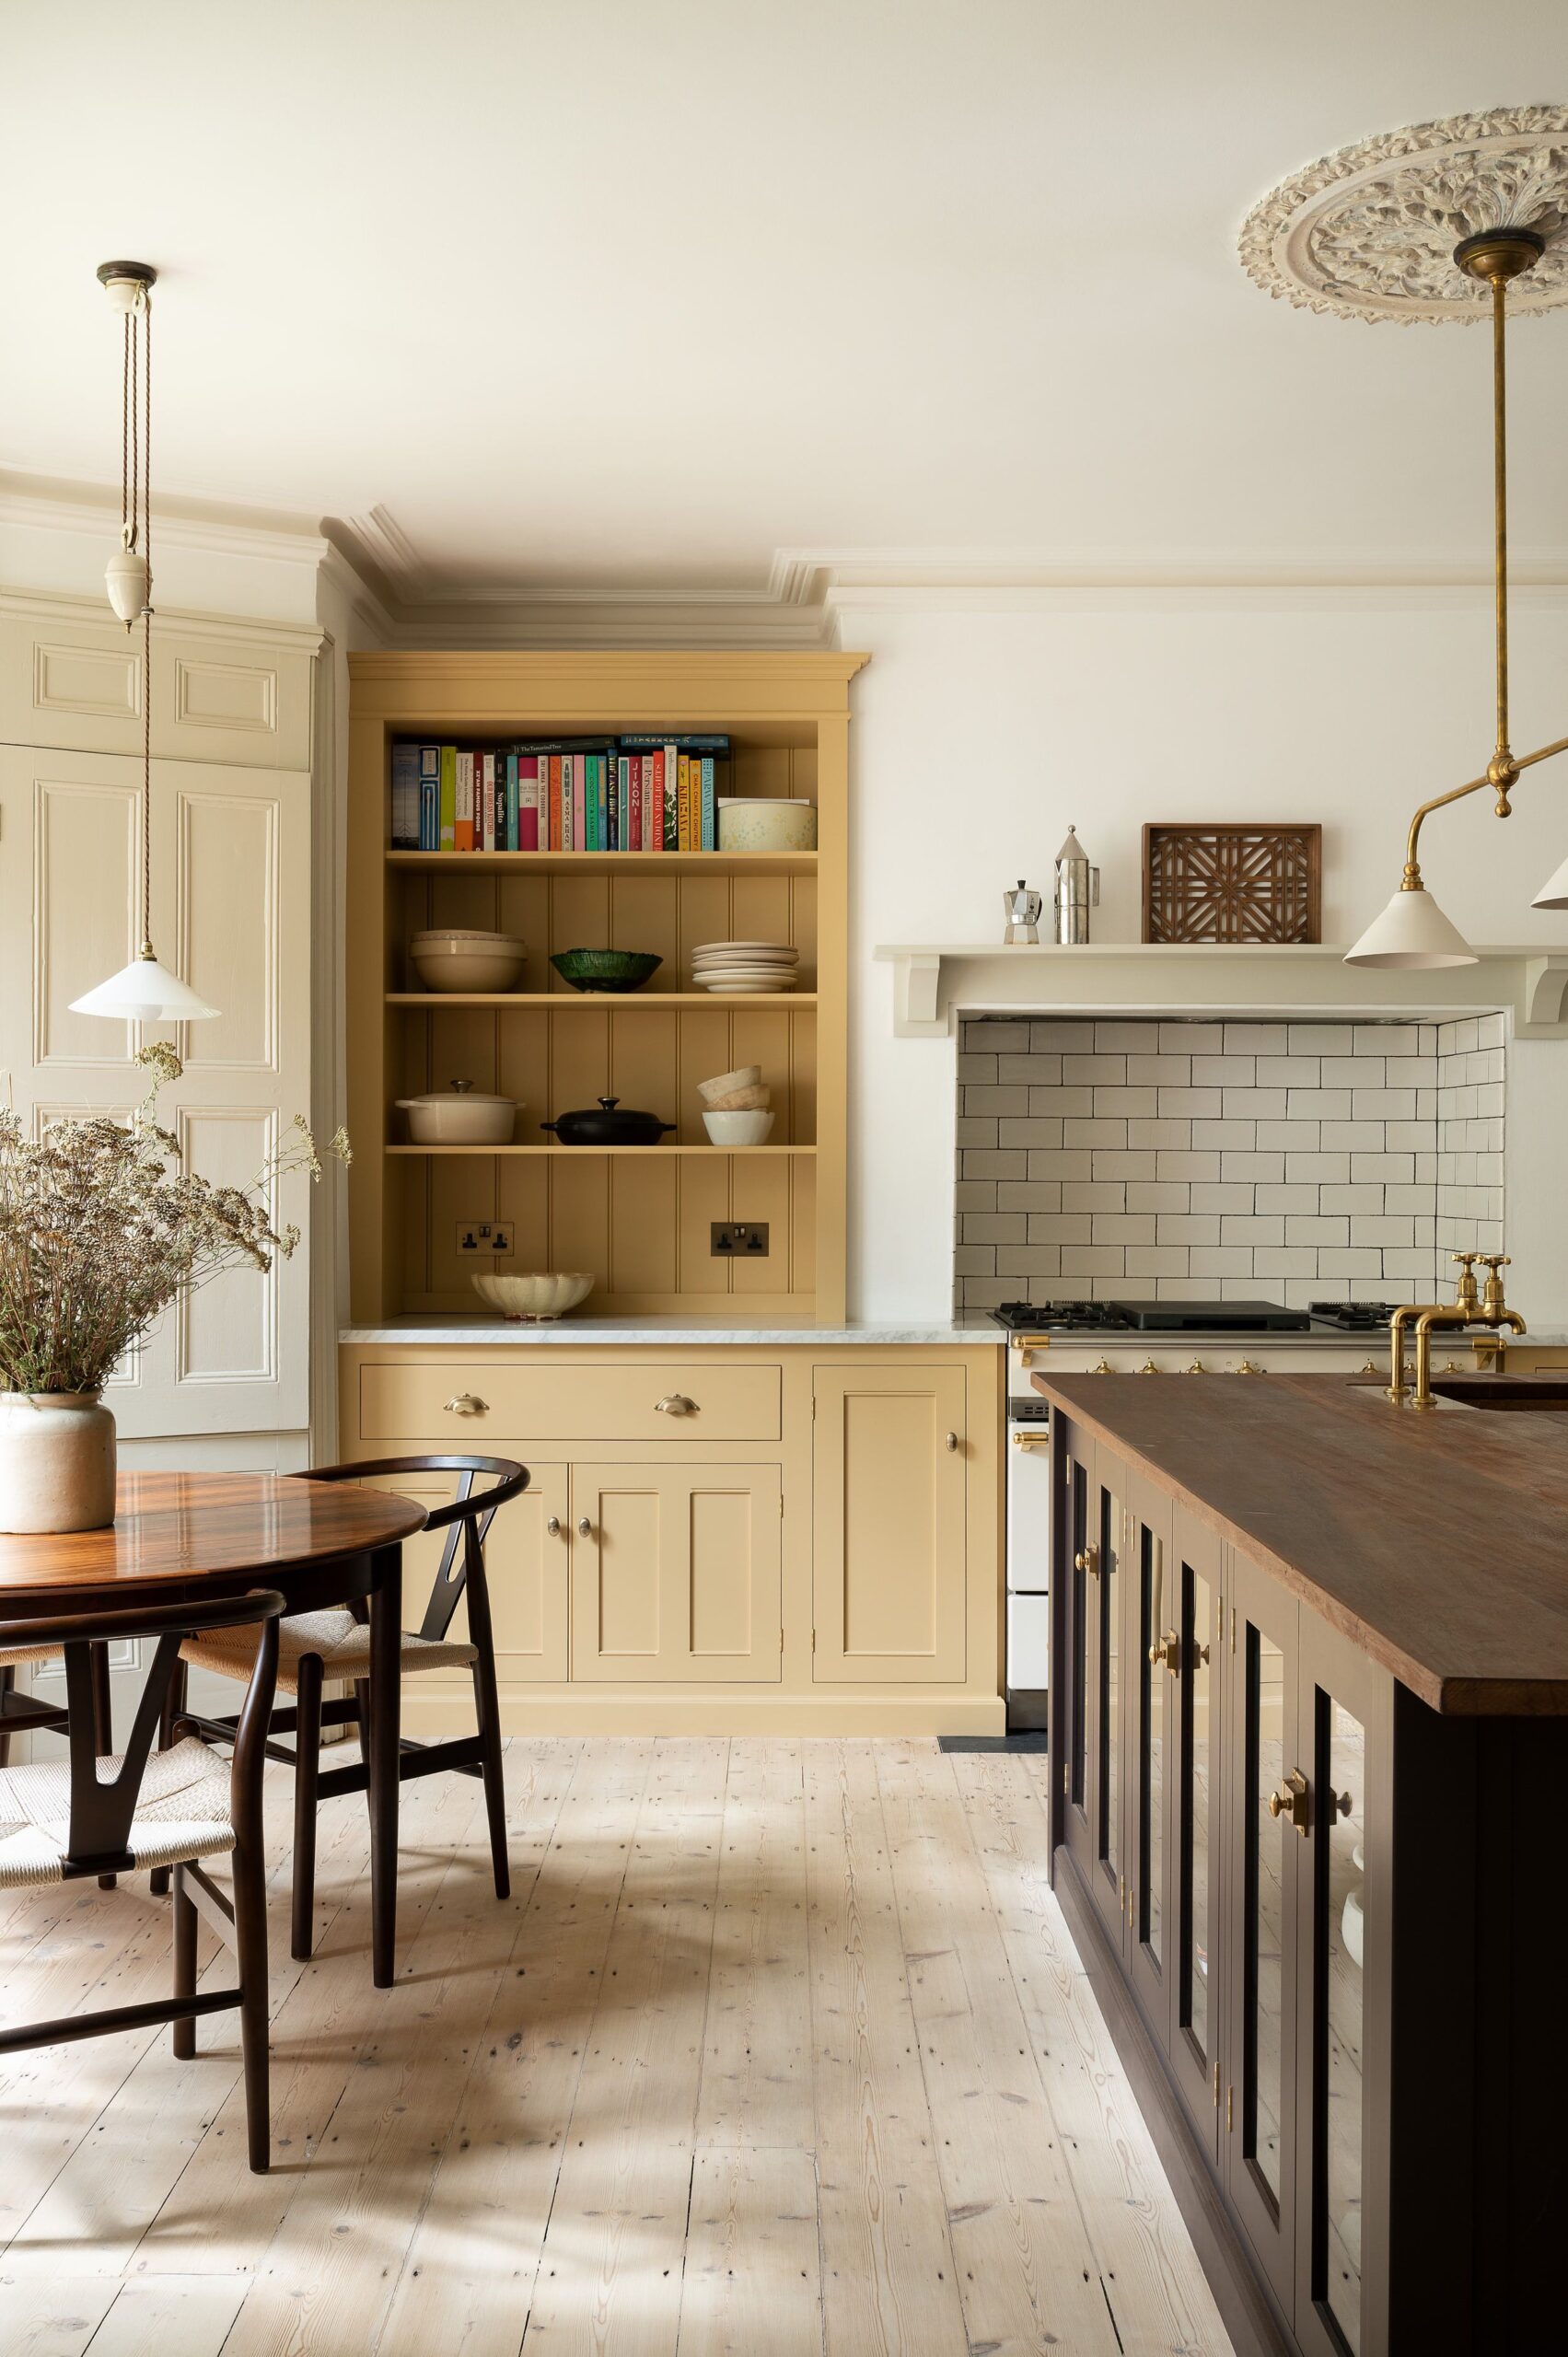 Choosing the Right Lighting for Your
Kitchen: Tips and Ideas